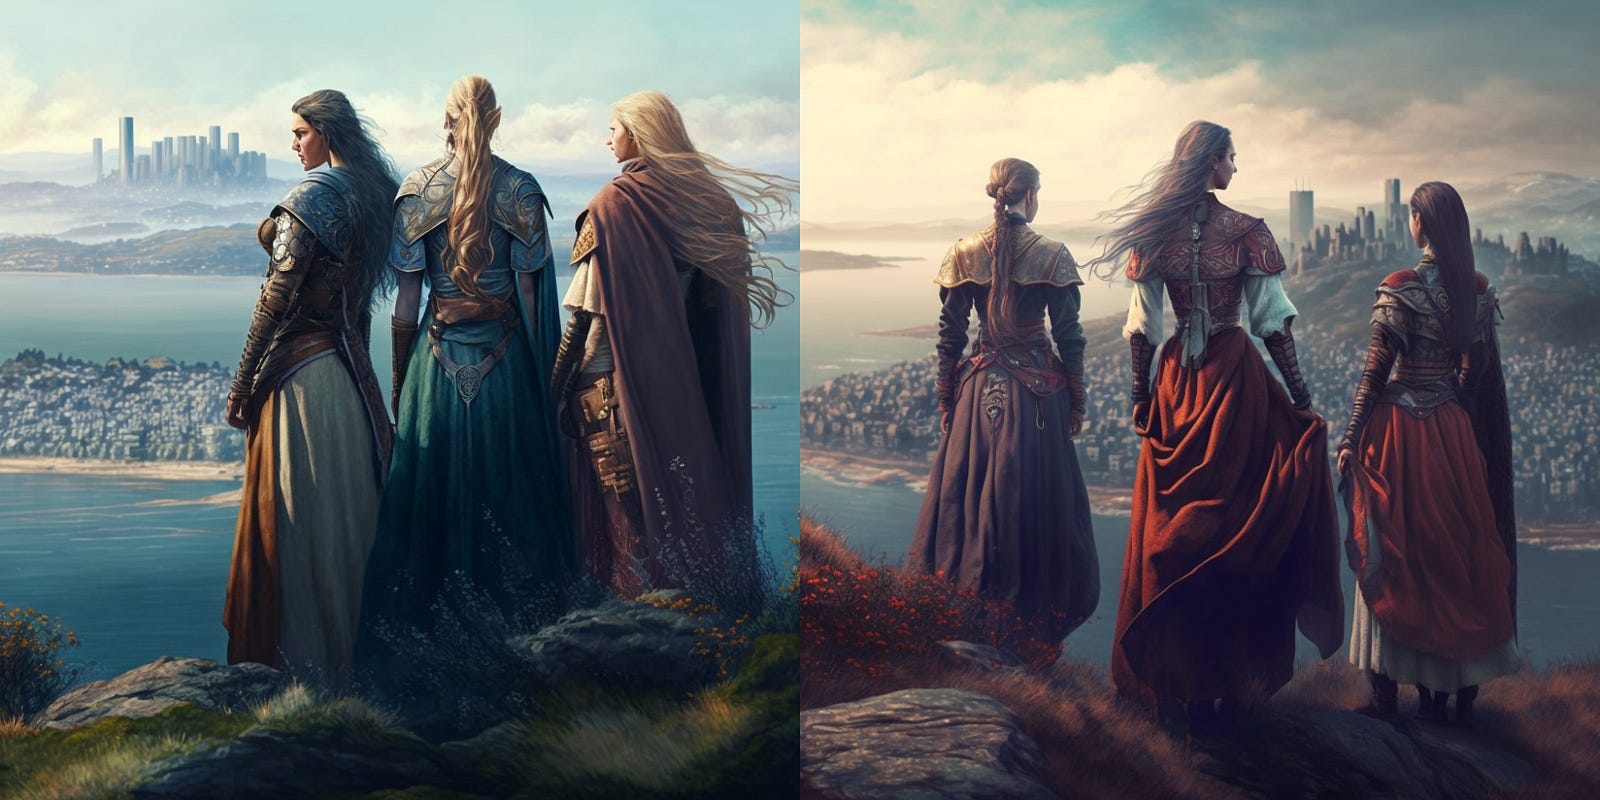 two images of fantasy women standing on a hill looking down at a city on a bay, images created with Midjourney